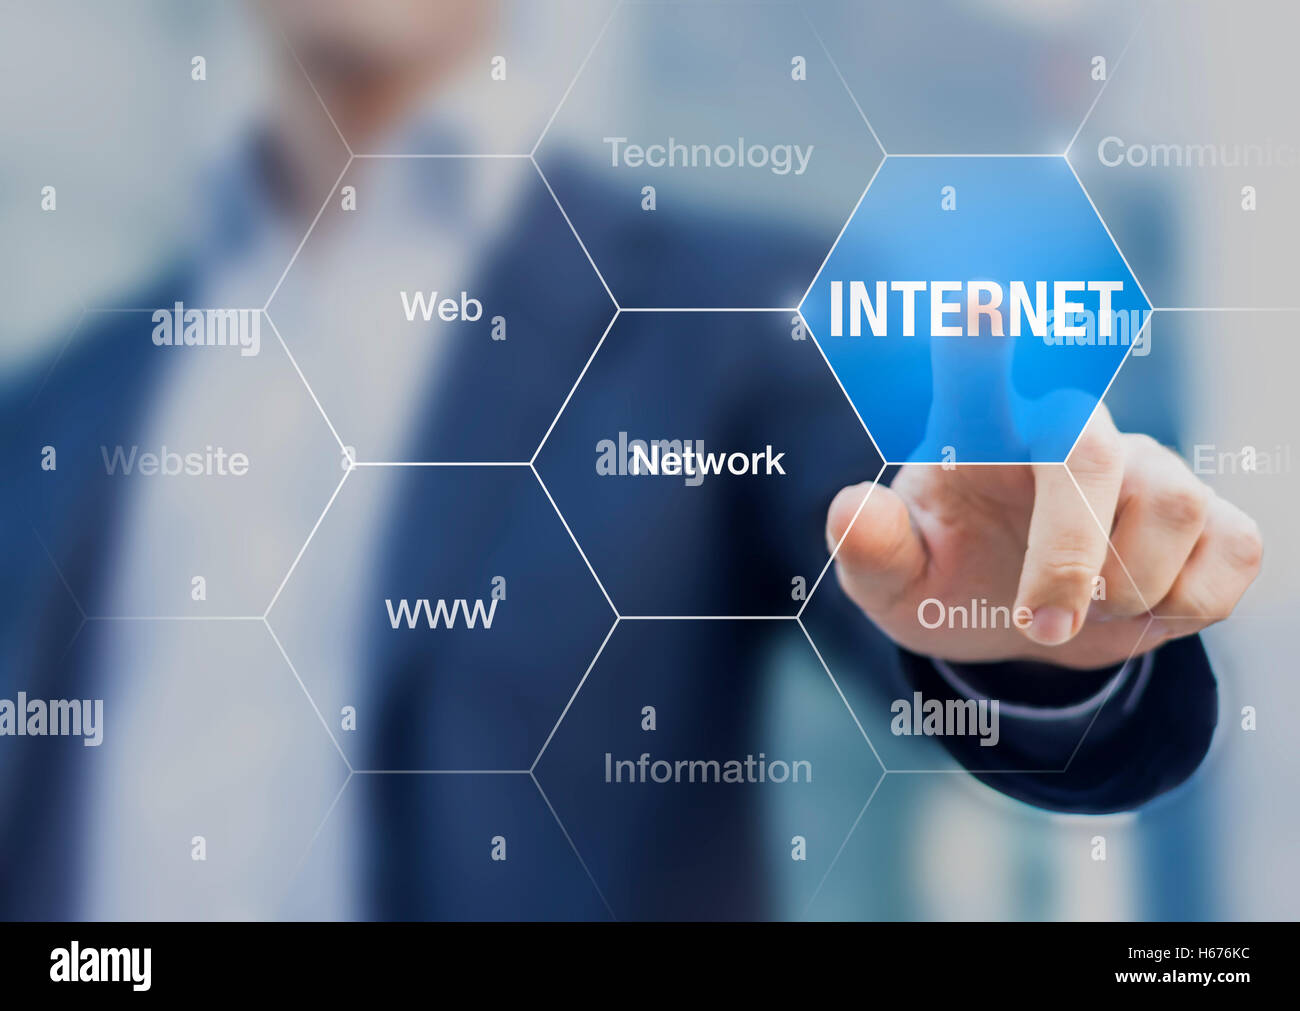 Businessman presenting the concept of internet and web technologies on virtual screen Stock Photo